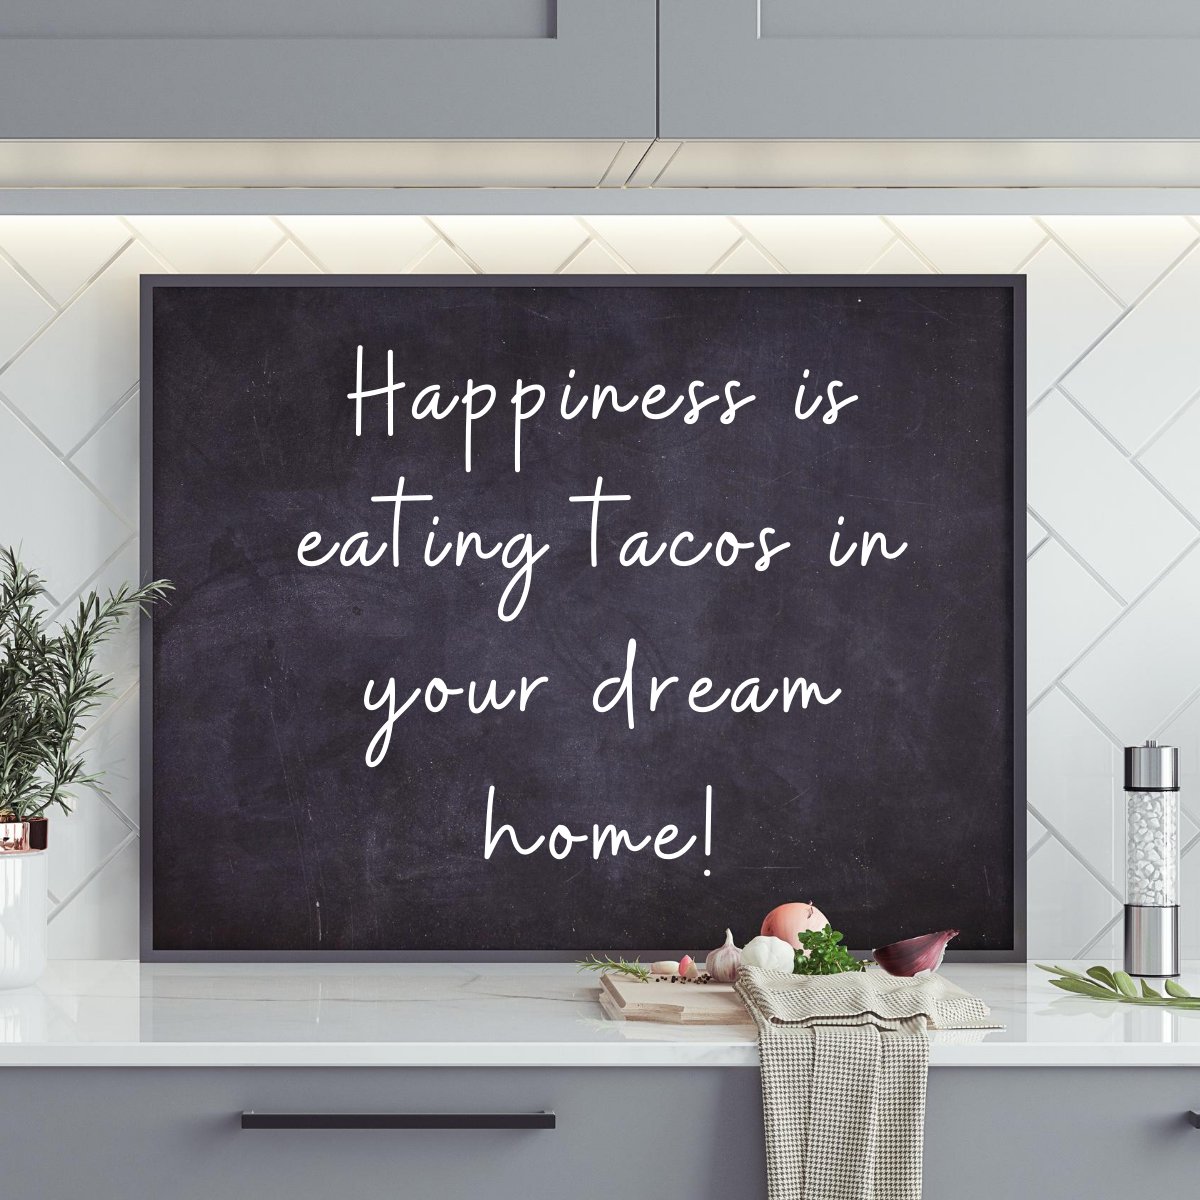 Let’s taco ‘bout how I can help make this happen! 🌮

#BuyAHome #HomeBuyerTips #TacoTaco #InTacosWeTrust #ilovetacos #TacosAreLife #FirstTimeHomeBuyers #StopRenting #BuyRealEstate #HomeBuyingProcess